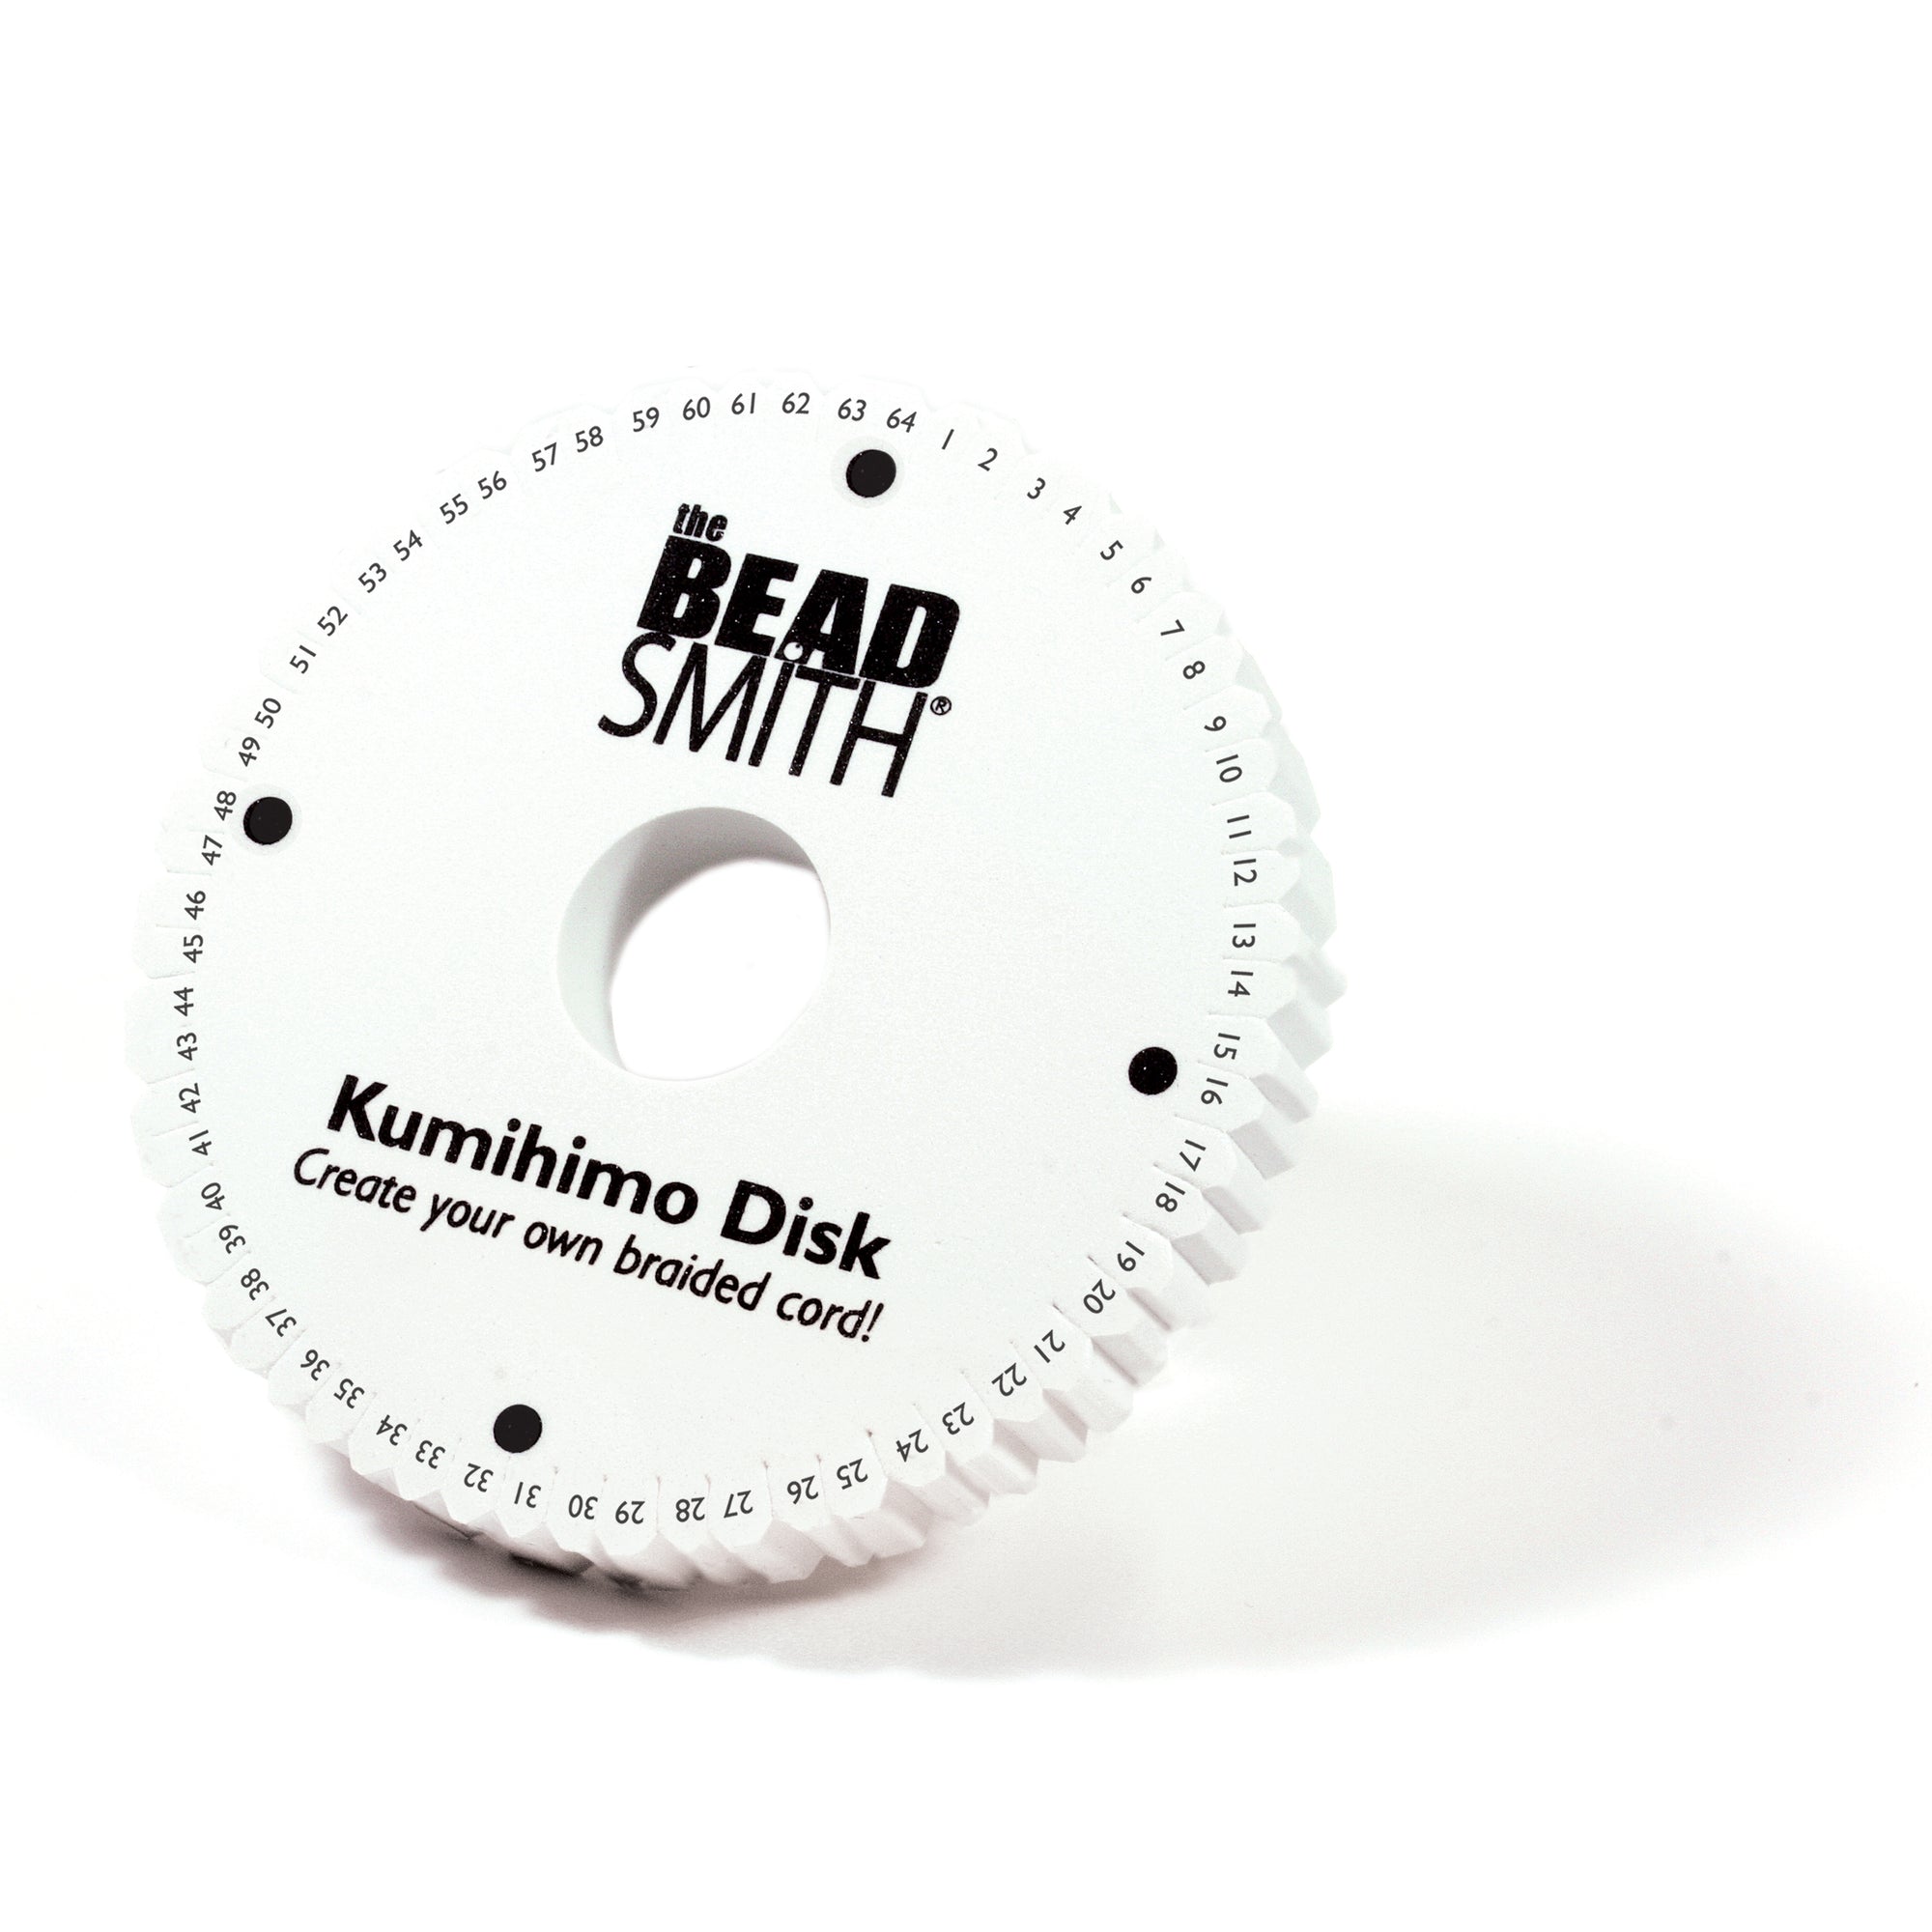 64 Slot Kumihimo Disk for Using Up to 40 Strings! Extra Thick Foam for Fine Threads, Wire & Beaded Kumihimo